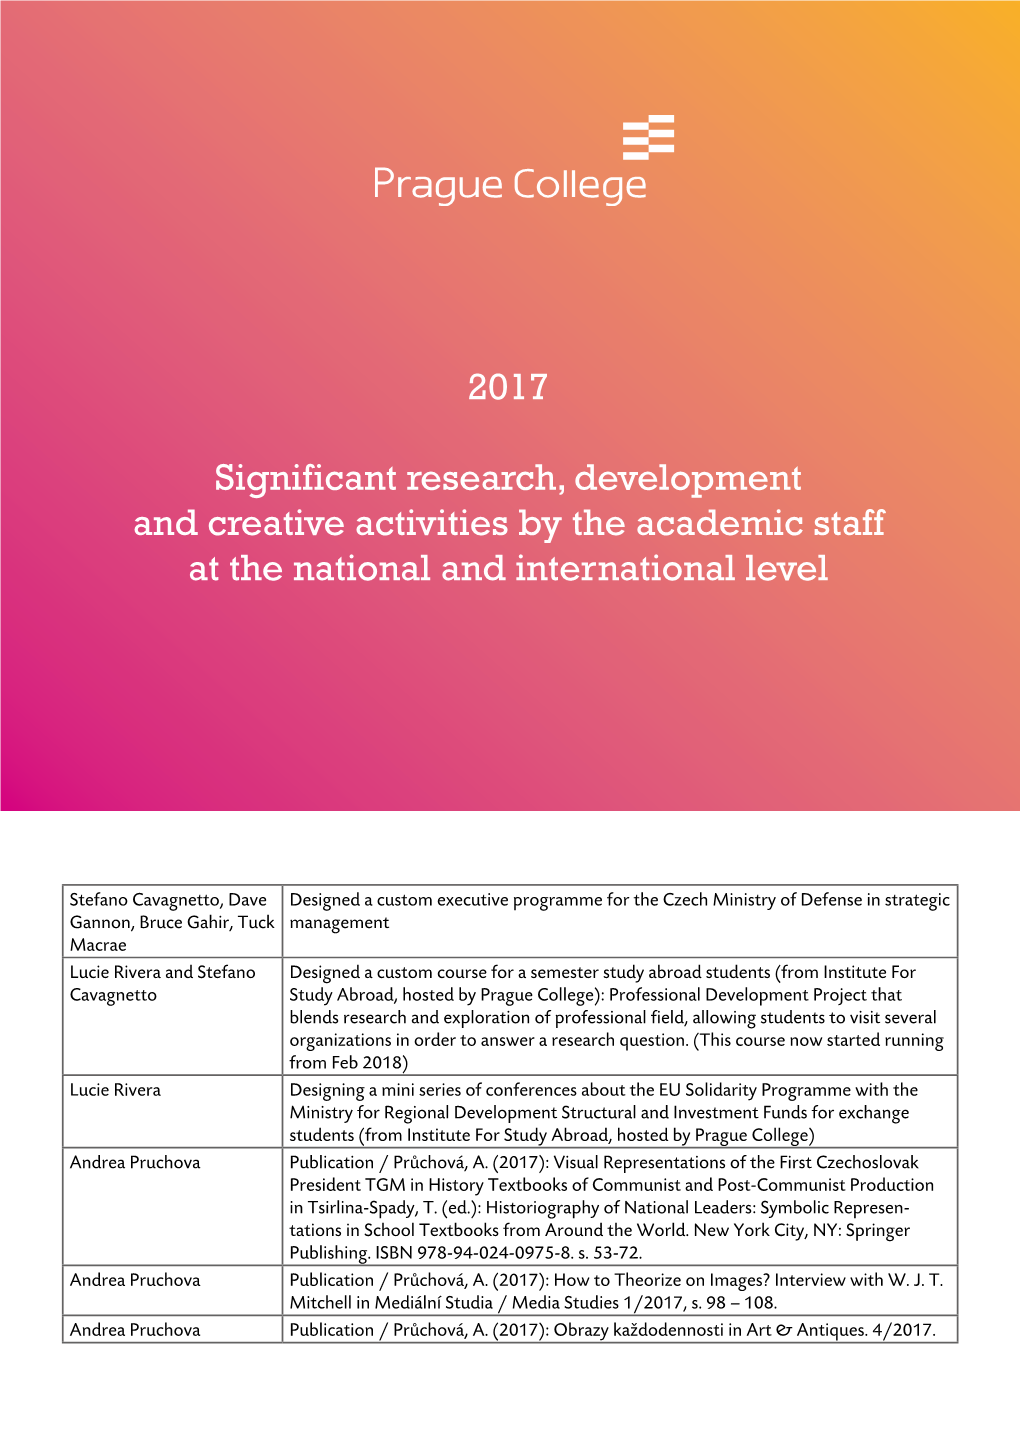 2017 Significant Research, Development and Creative Activities